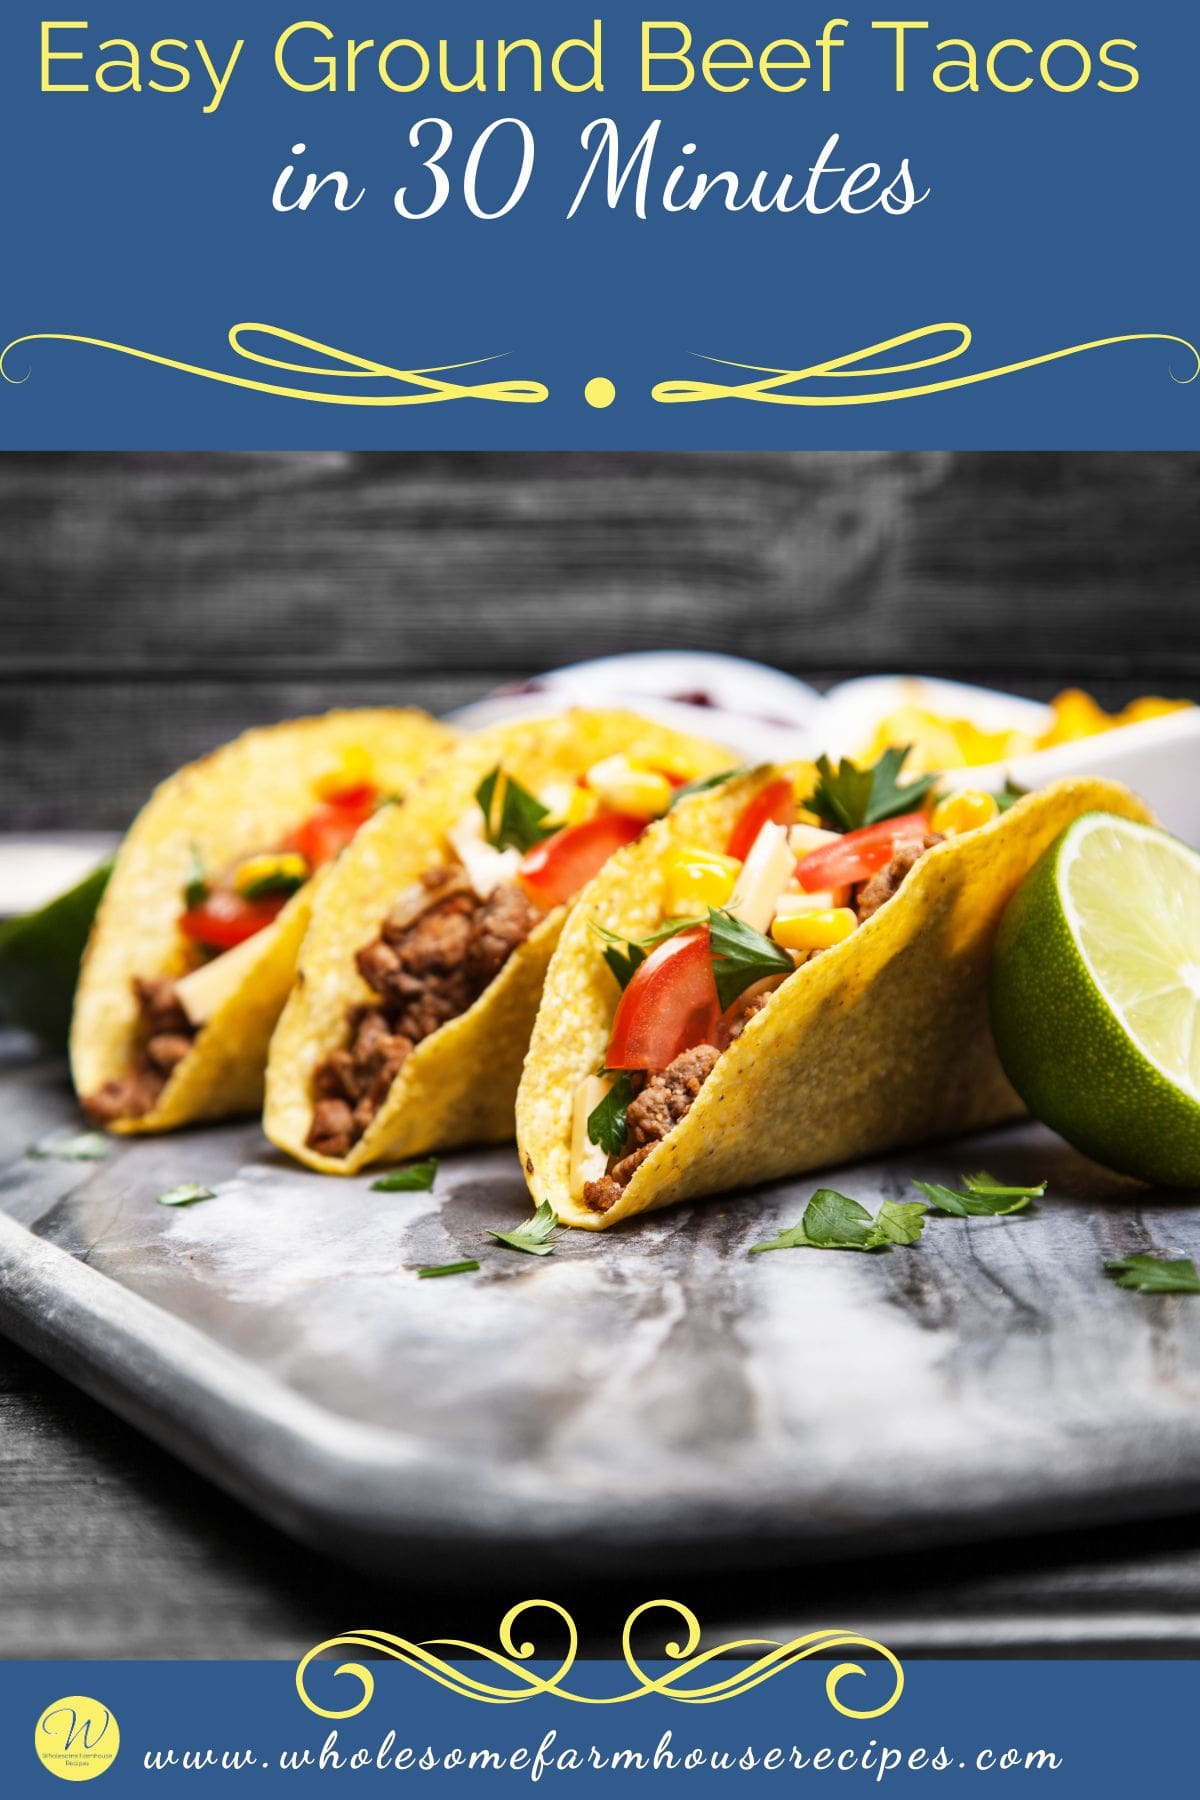 Easy Ground Beef Tacos in 30 Minutes